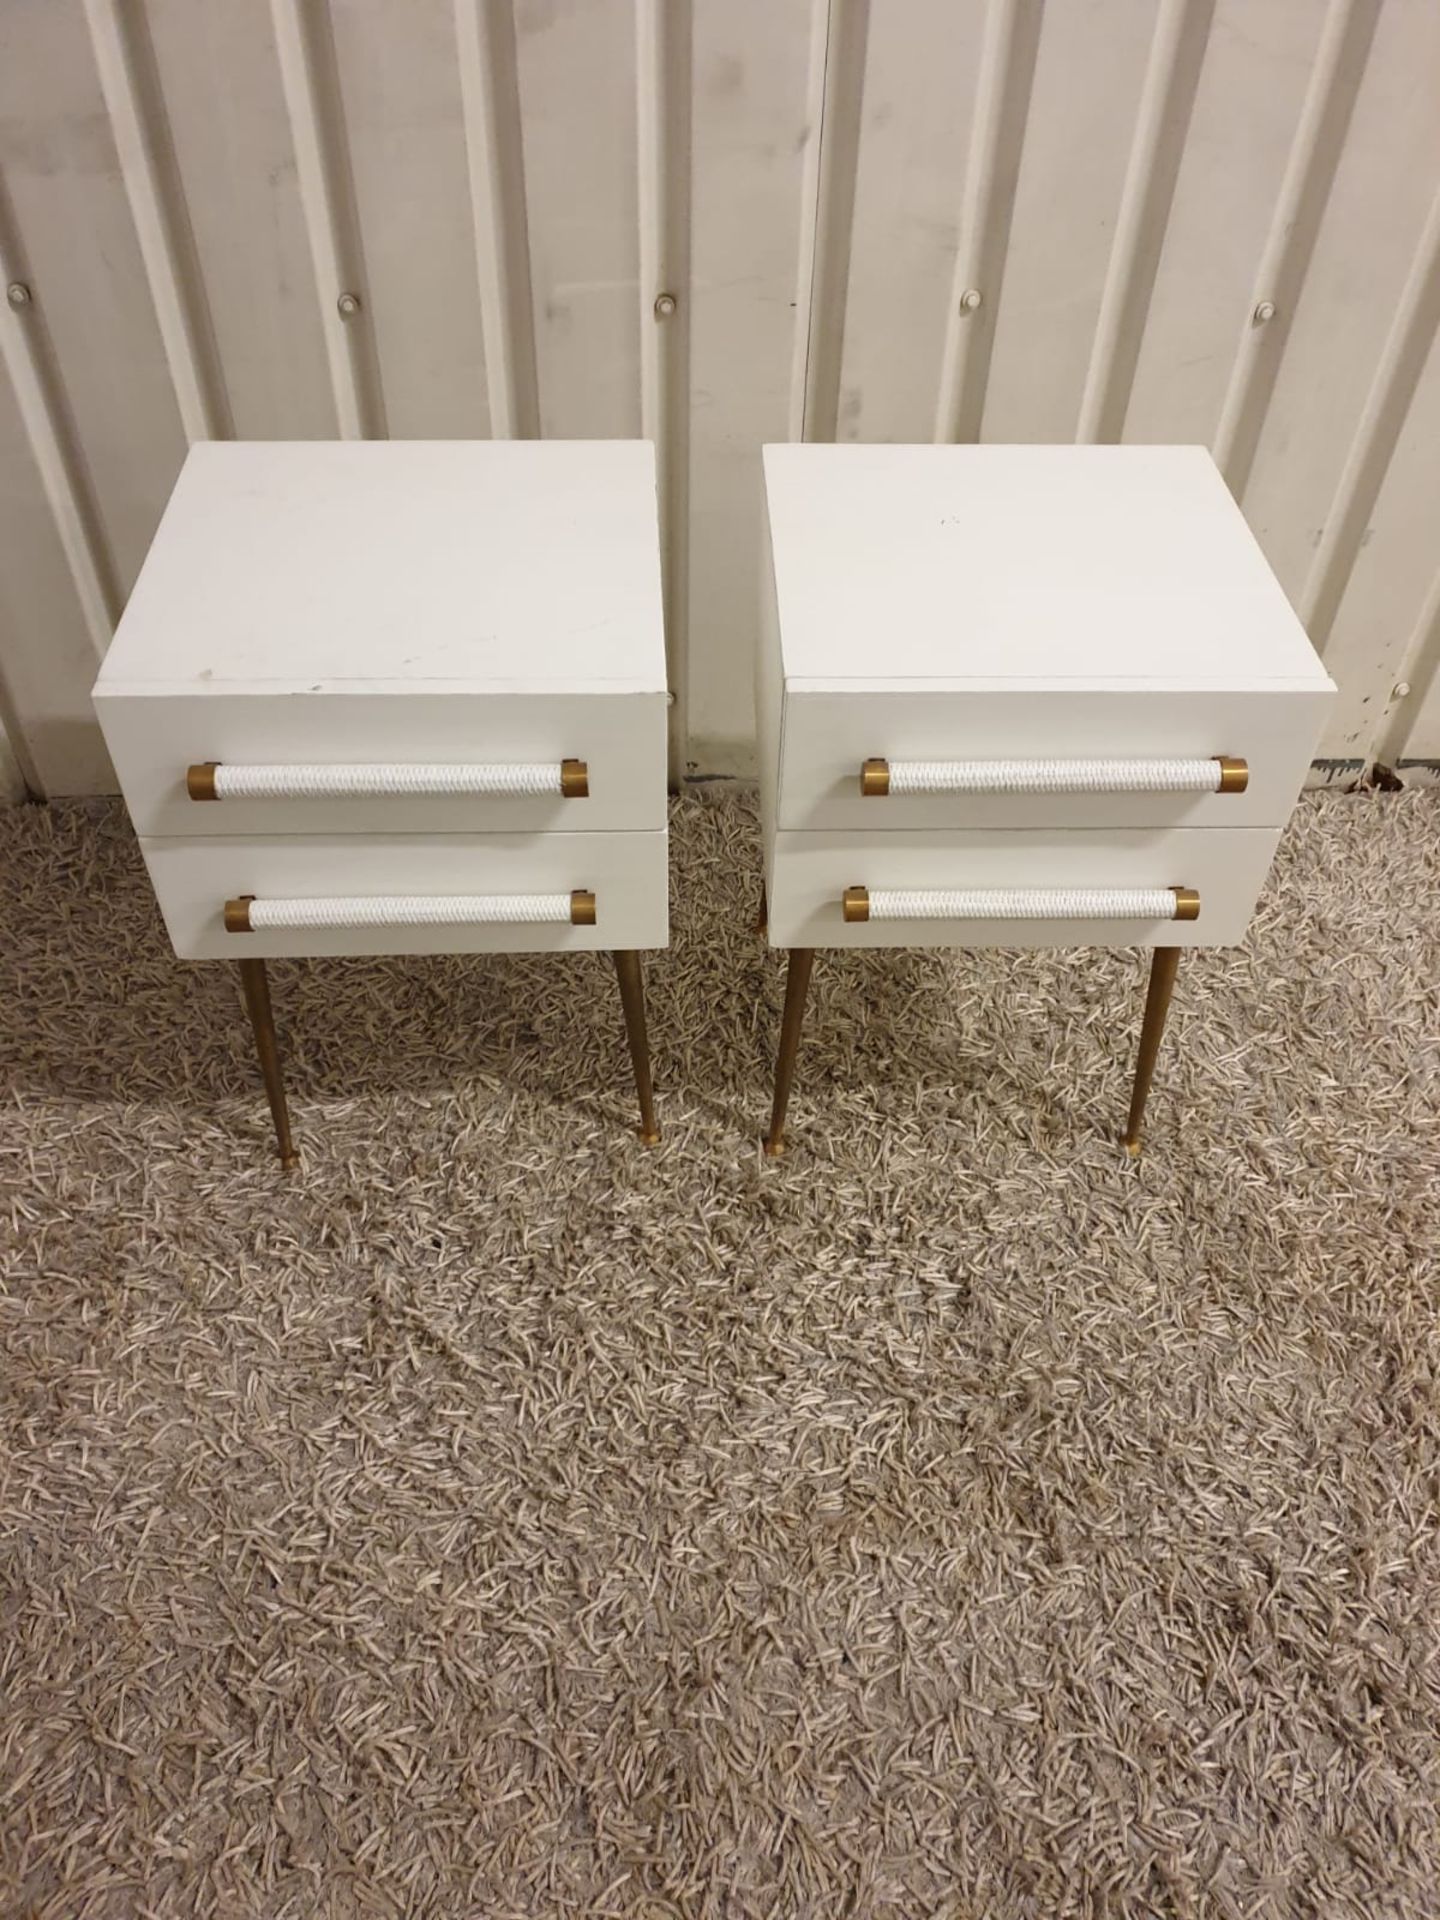 A pair of nightstands two drawer A stunning staple equipped night table with gorgeous gold-finish - Image 2 of 2